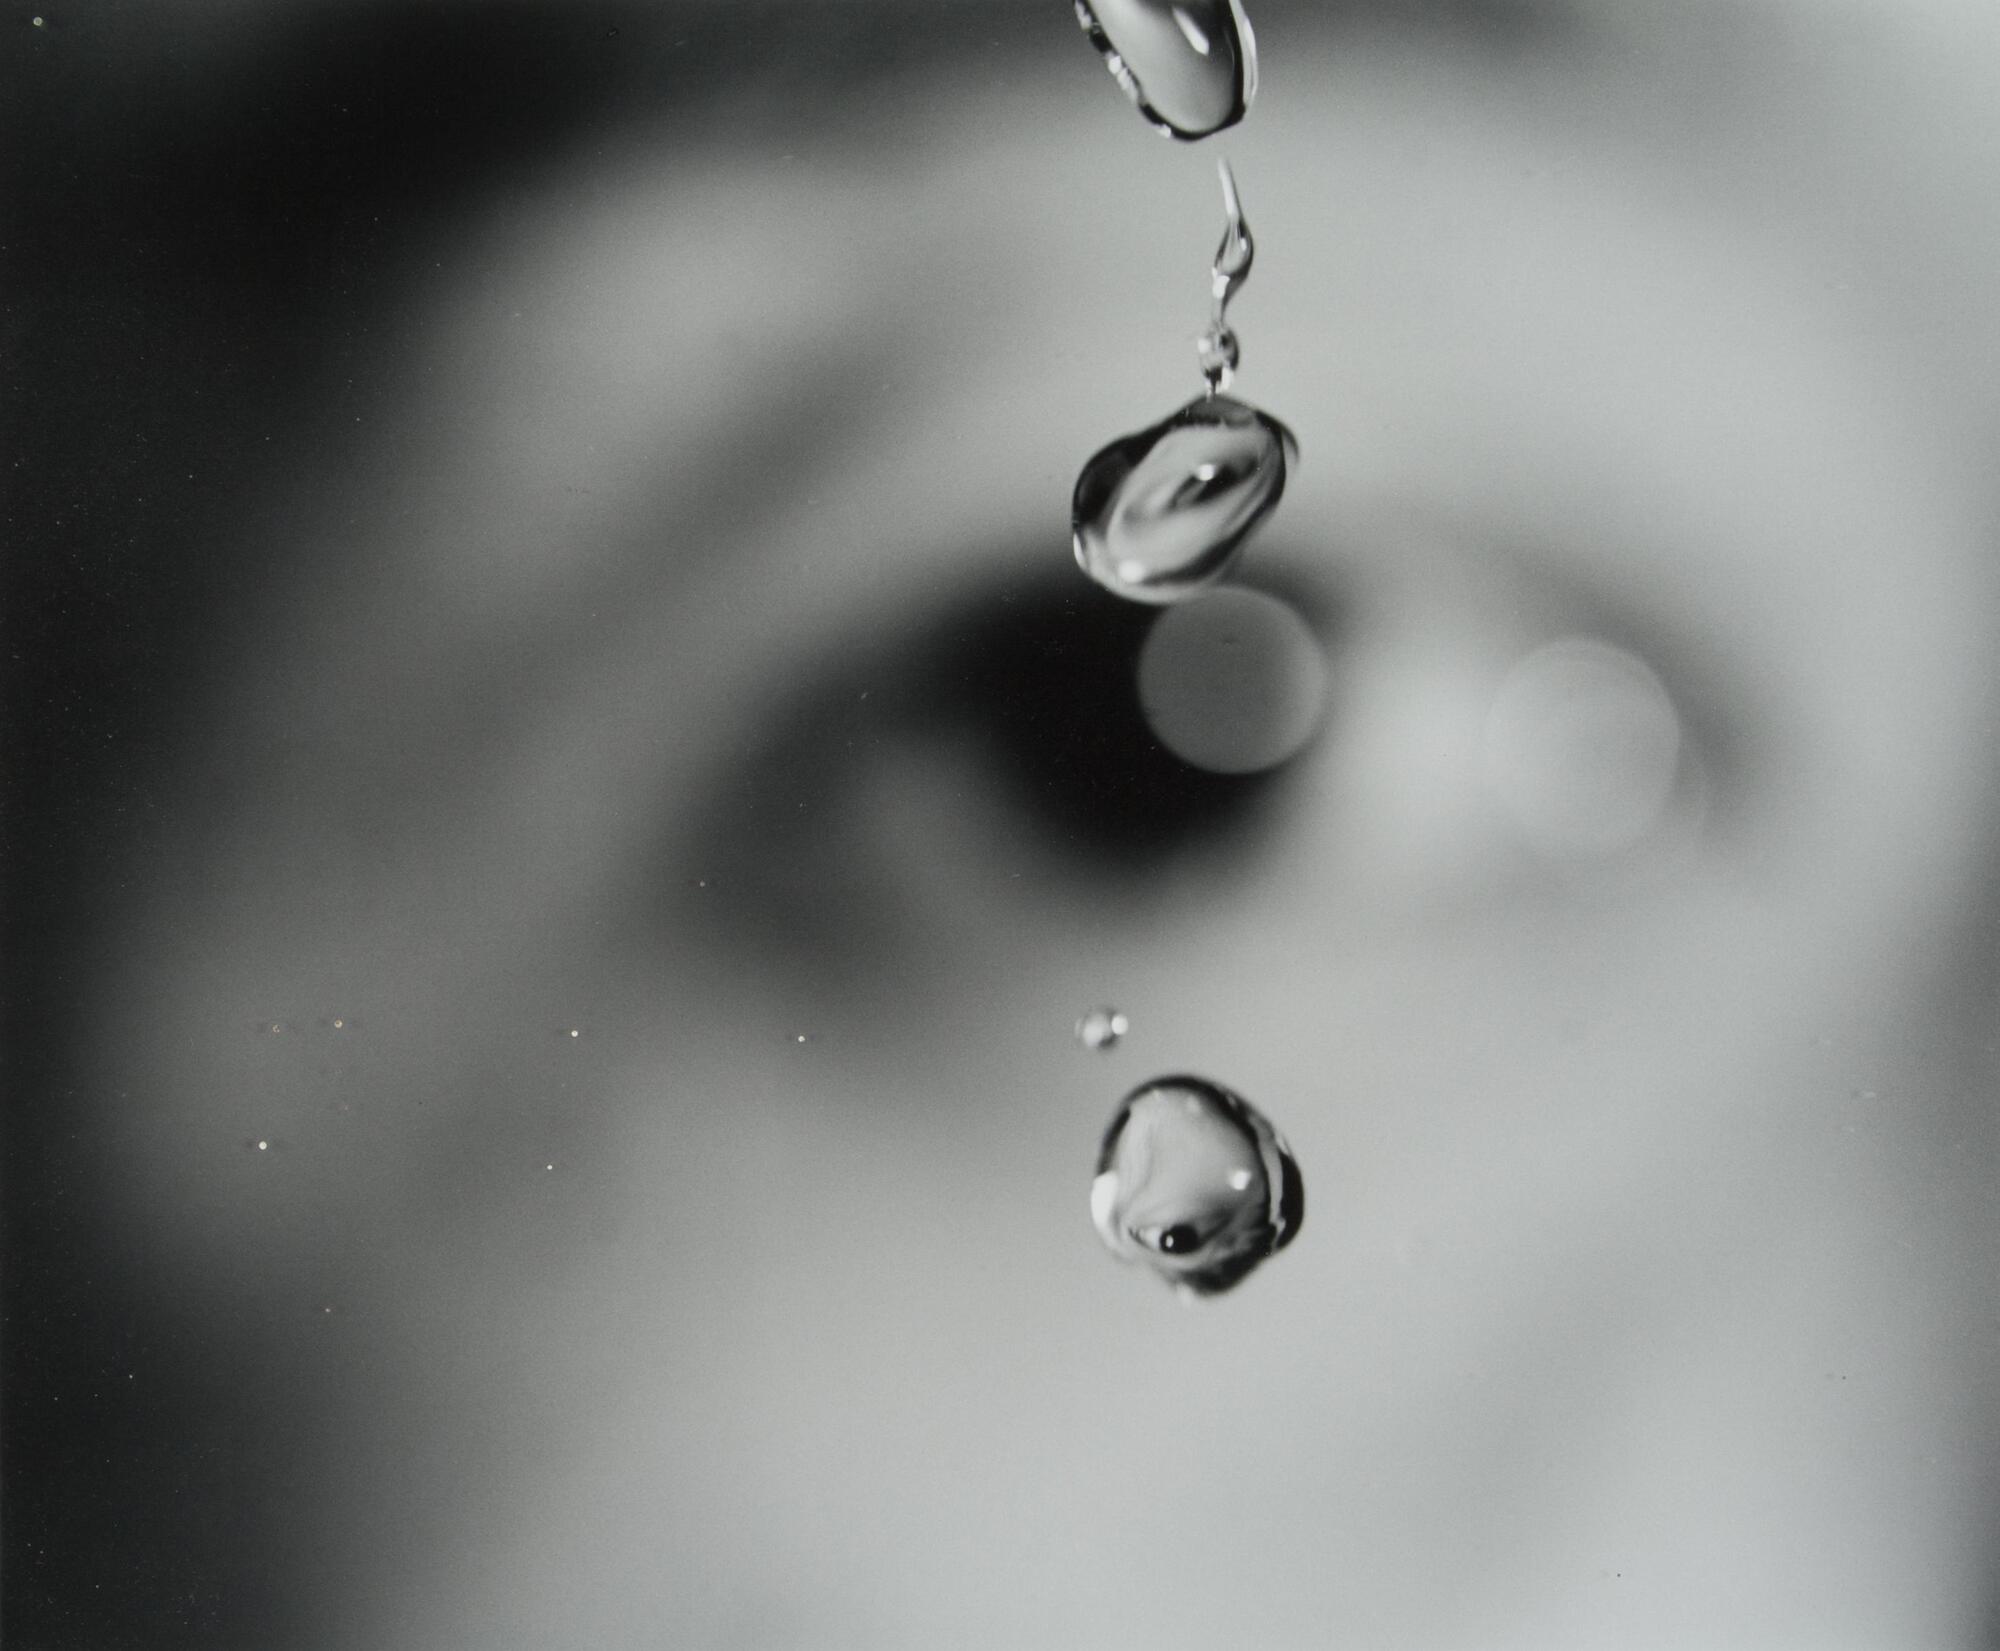 A black and white photograph of droplets of water captured in suspension. Behind the water droplets, an eye is visible, though it is blurred by a shallow depth of field. In the water droplets, the eye is reflected upside down and in sharp focus.